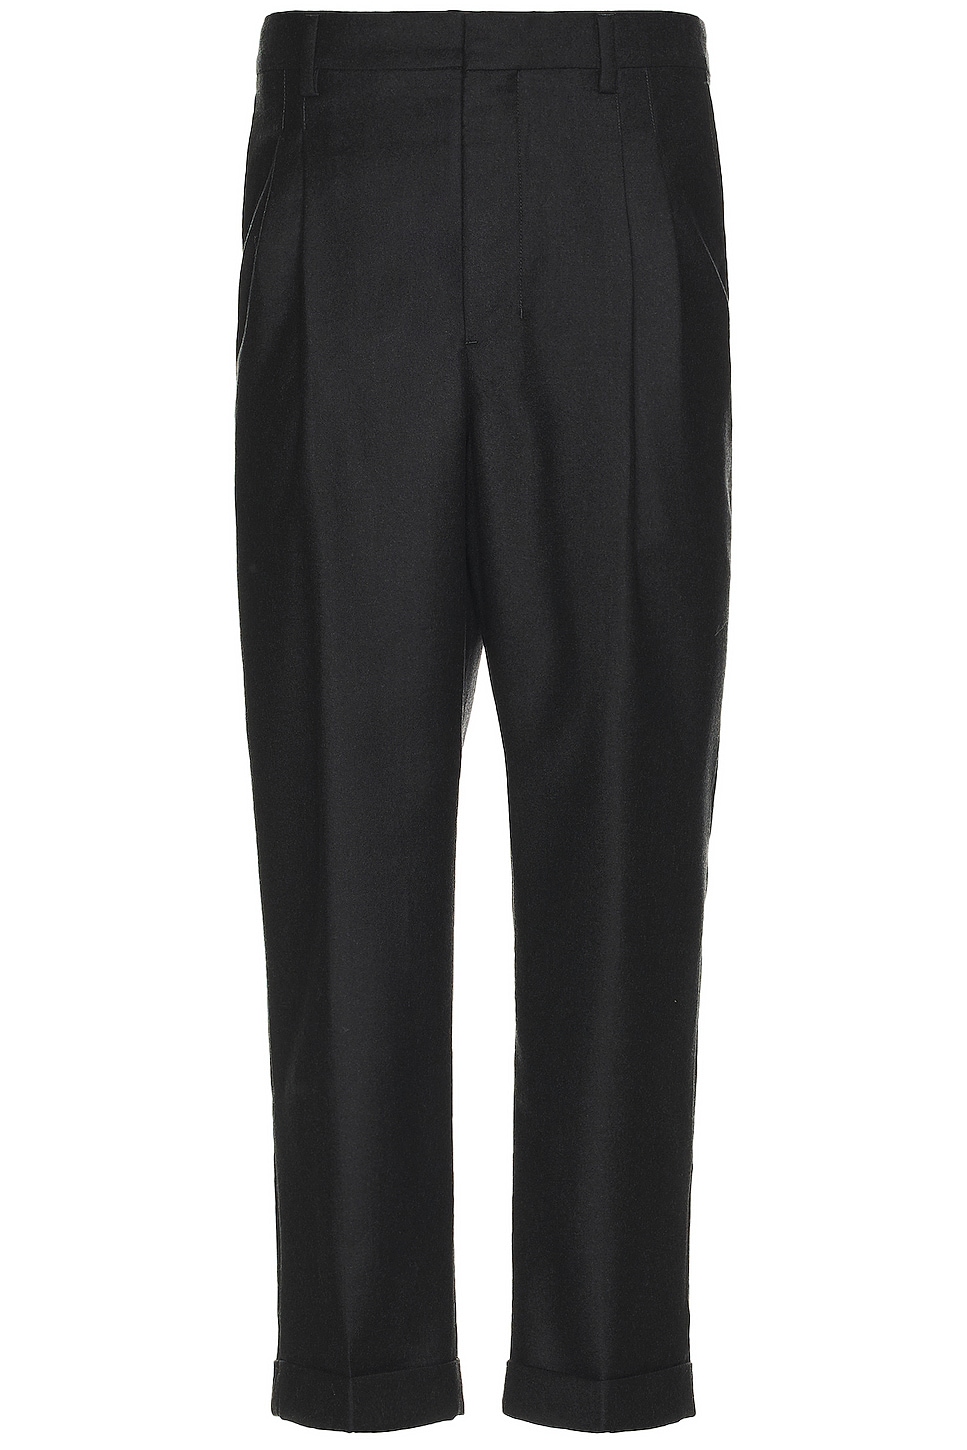 Image 1 of ami Carrot Fit Trousers in Heather Grey